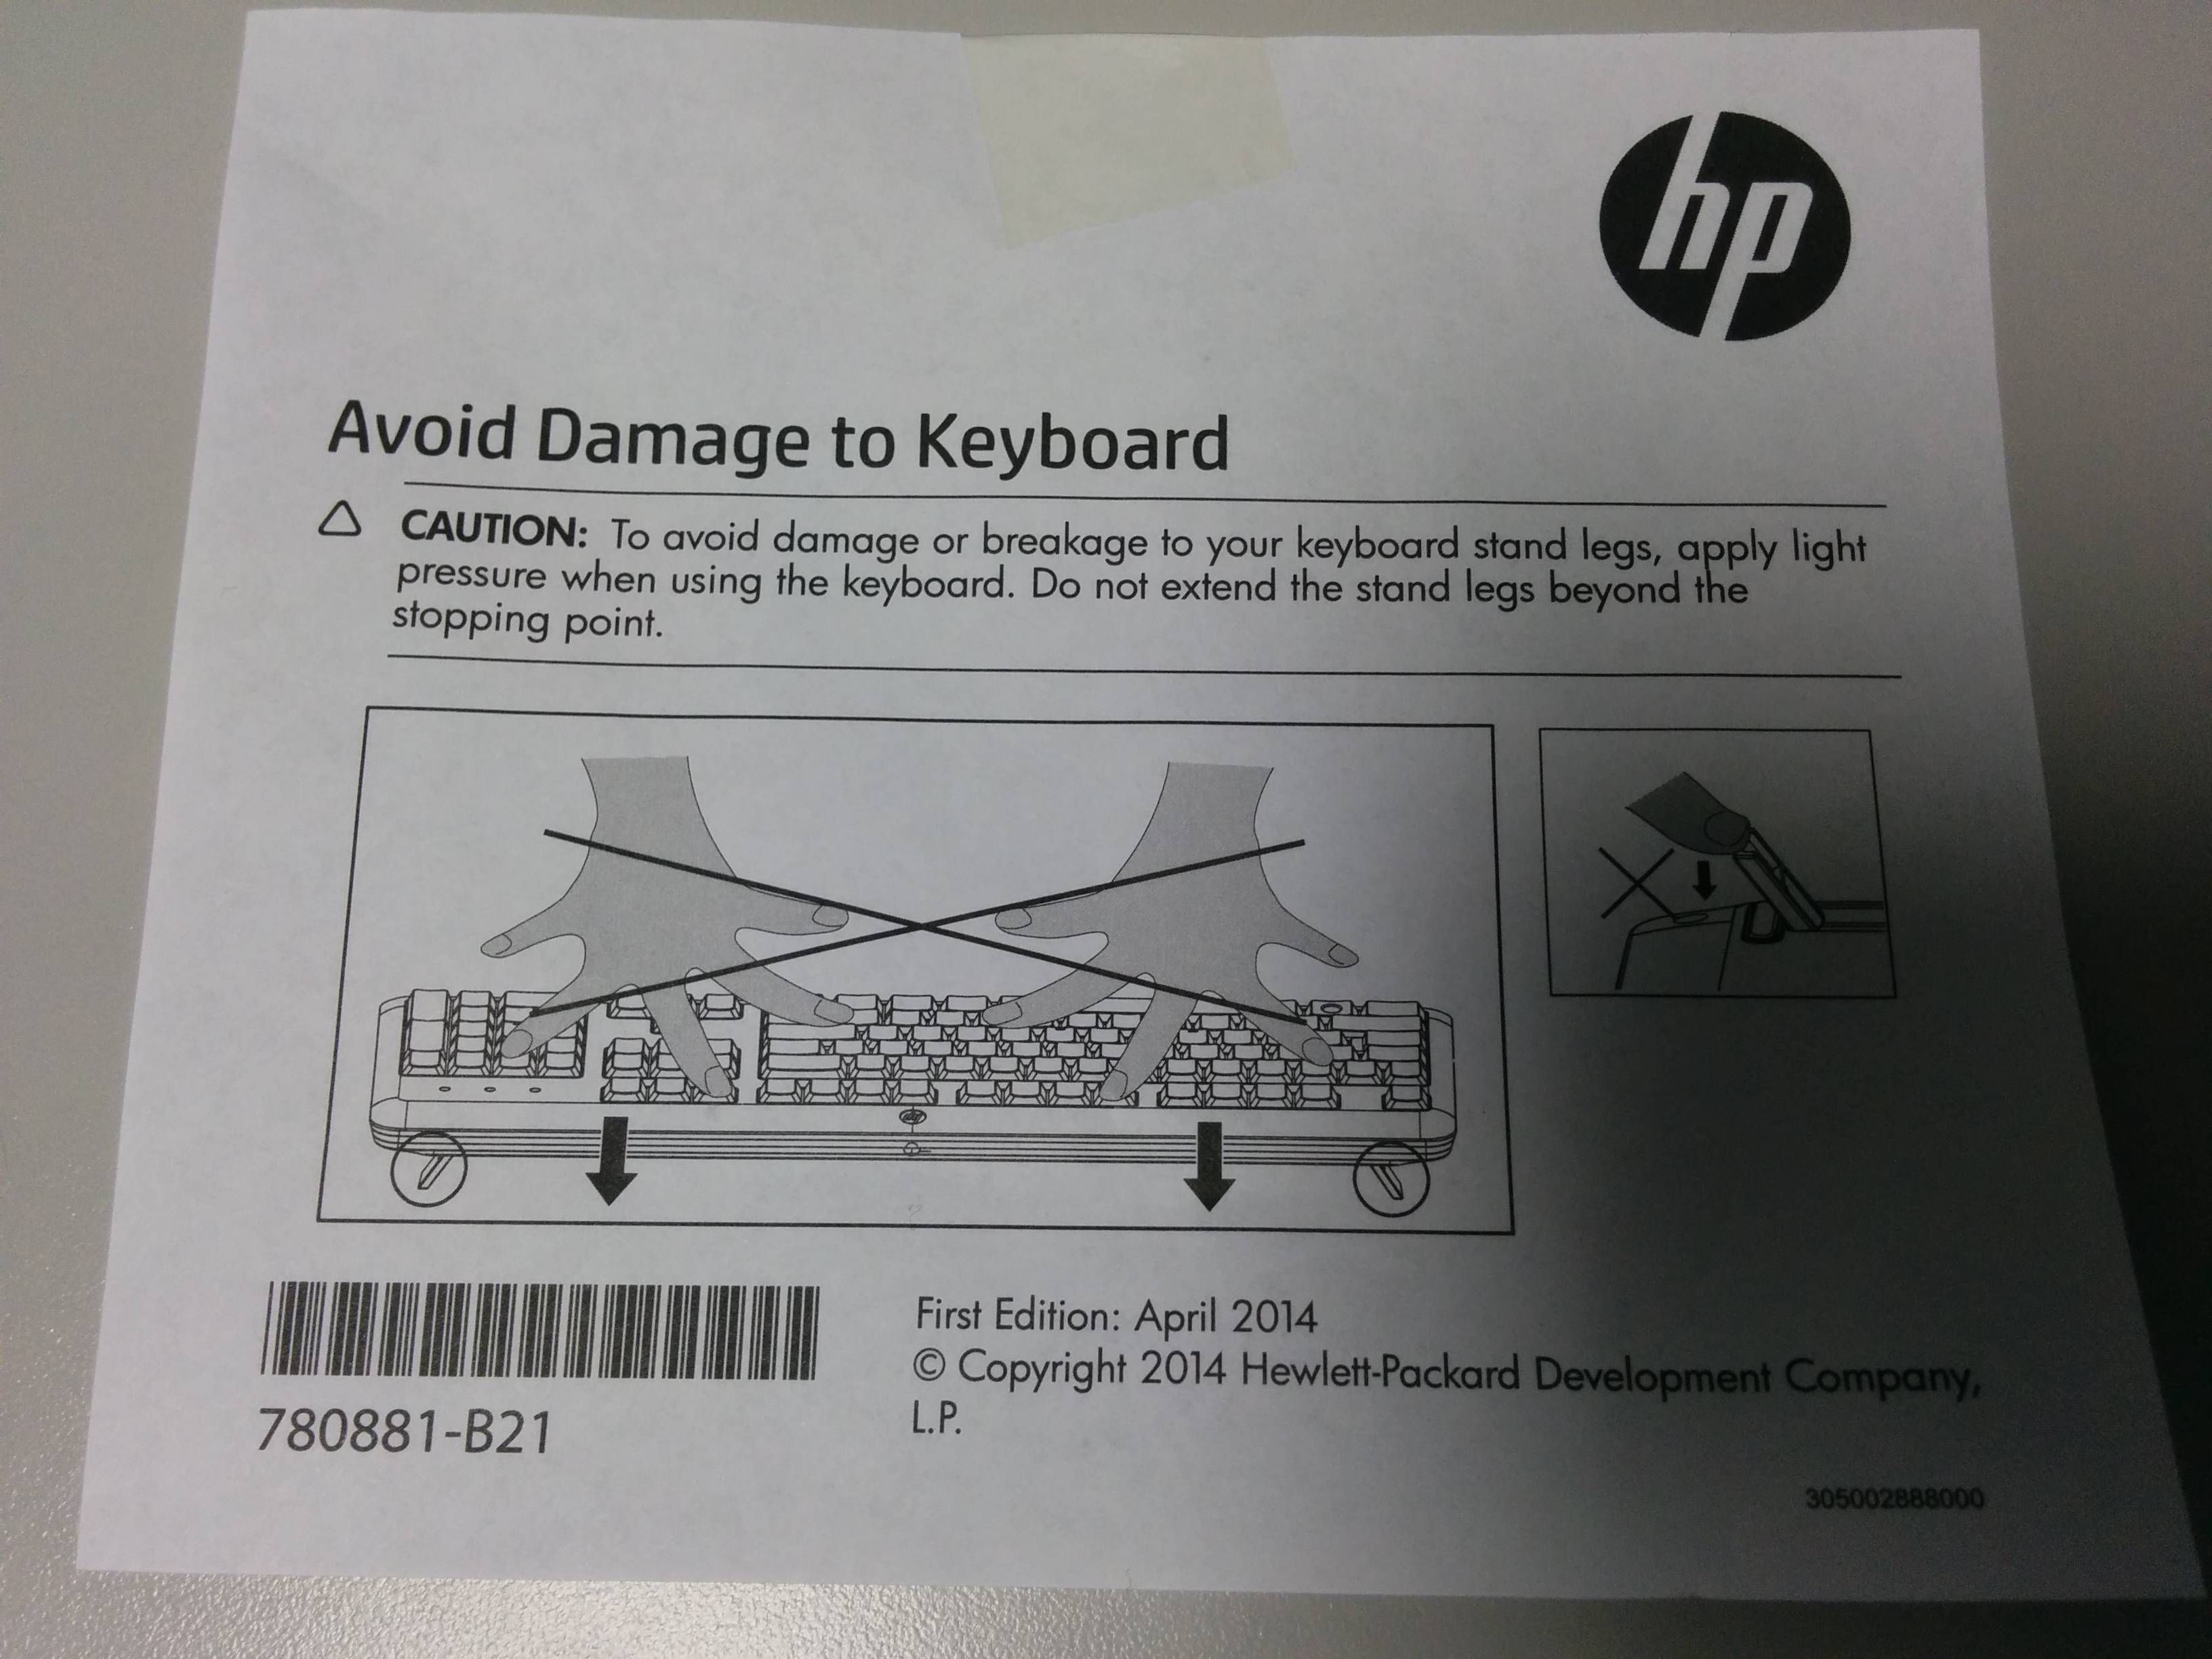 HP could use a new hand model